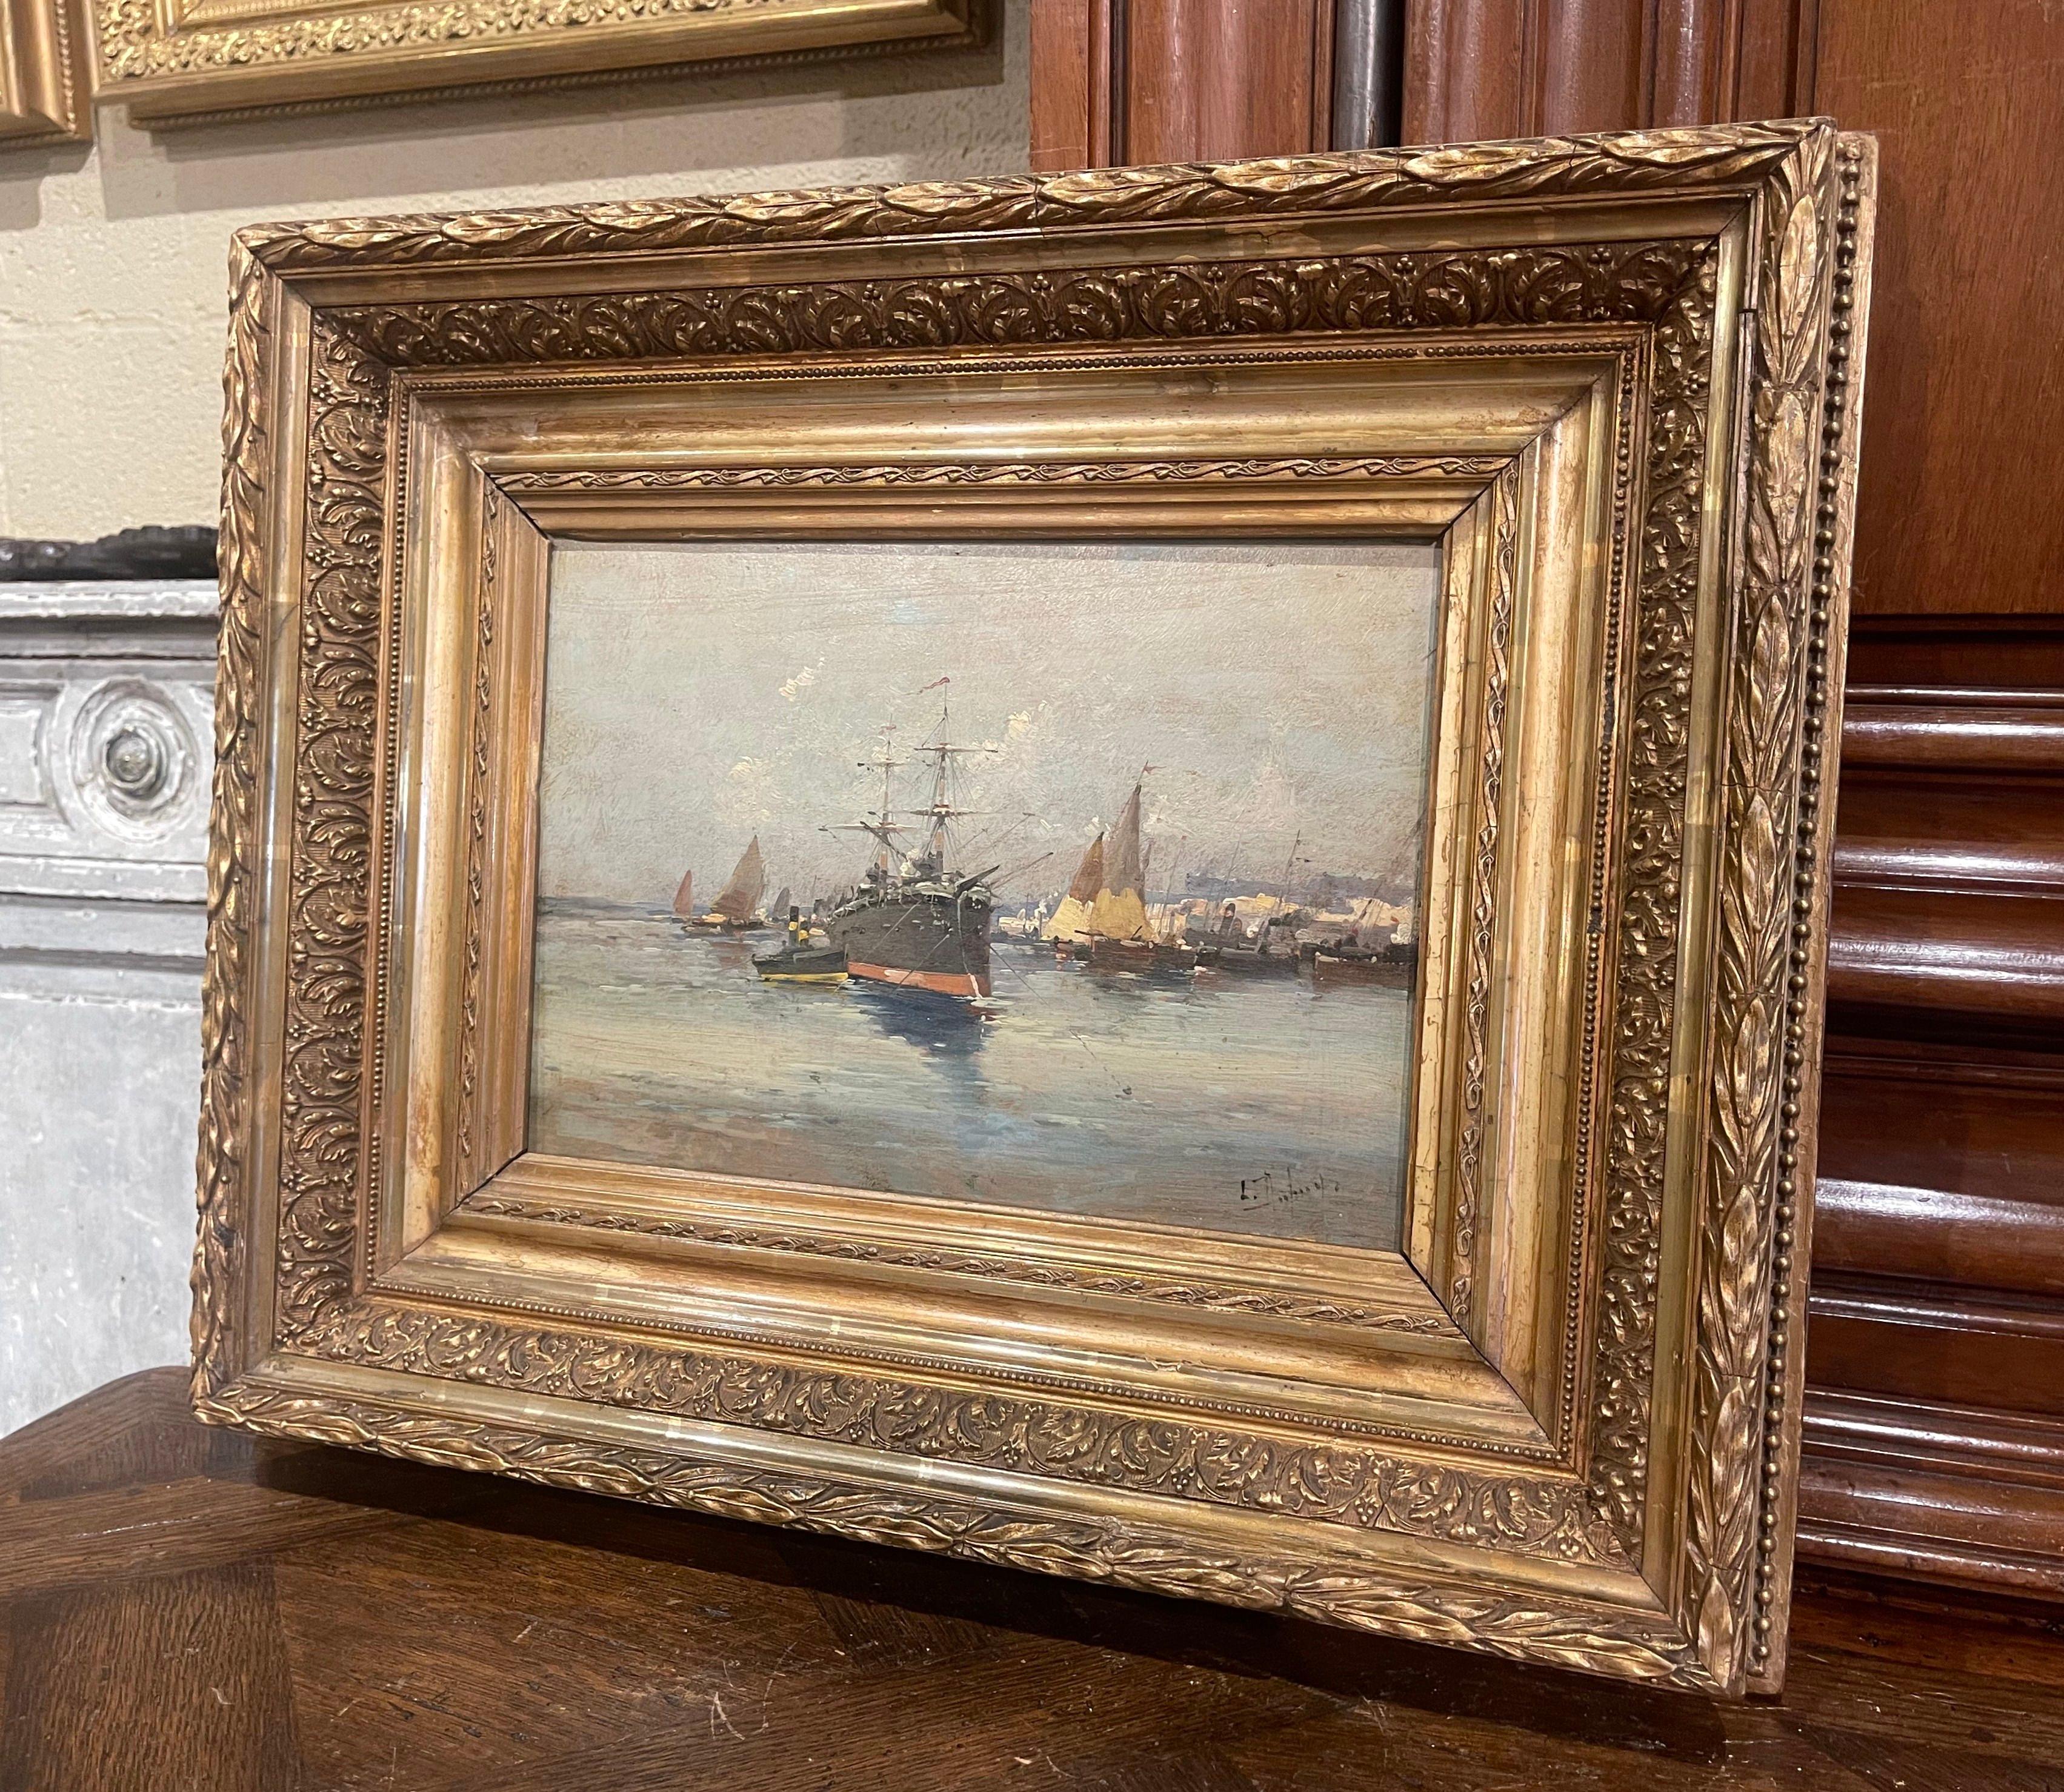 Decorate a study, living room or den with this beautiful and colorful antique oil painting! Painted in France circa 1890, the artwork is set in the original carved gilt wood frame; it illustrates a picturesque, ocean-front port scene in coastal